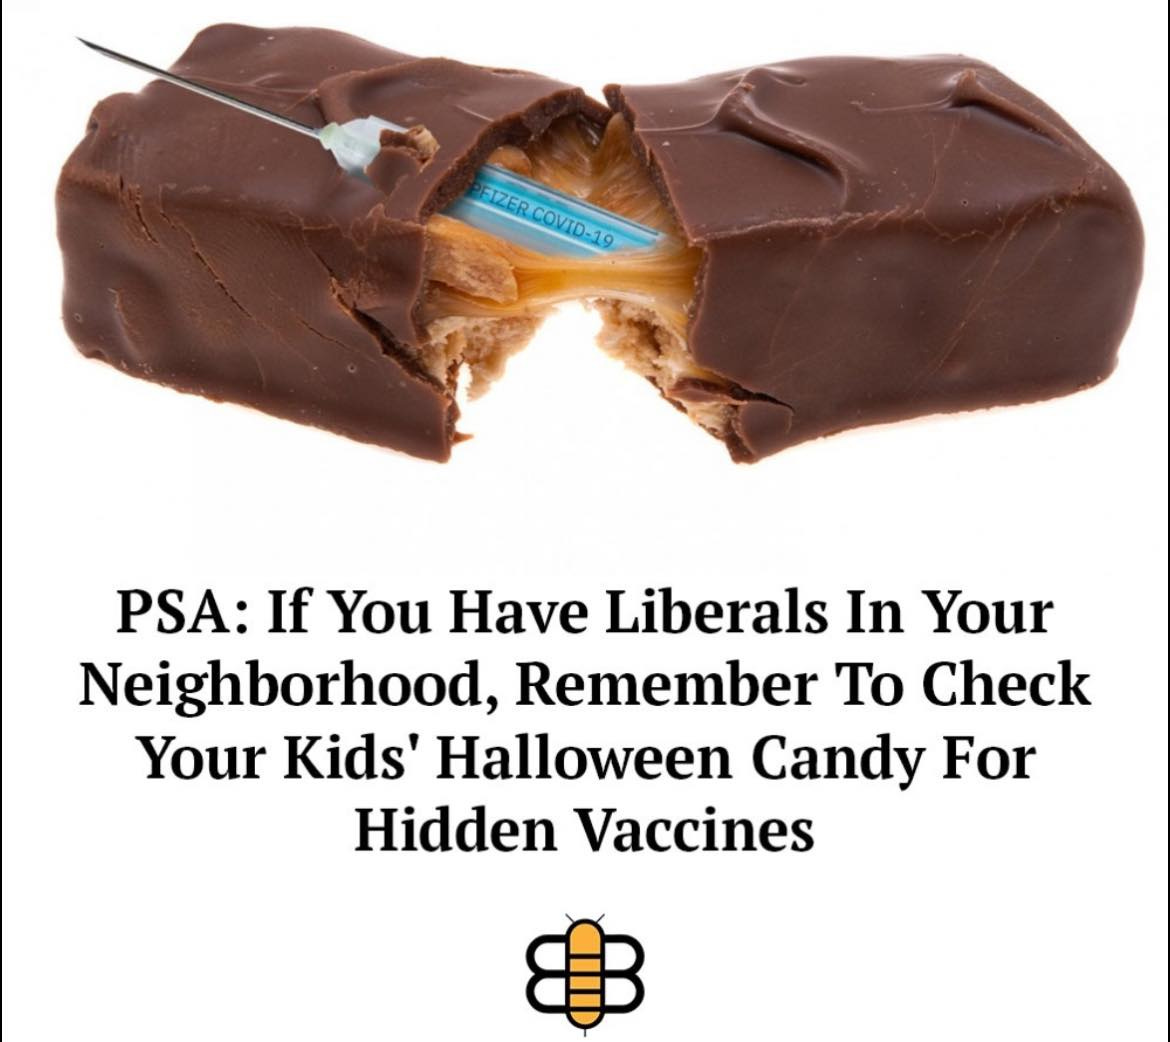 May be an image of dessert and text that says 'IZER TOCRCOVIO-1D COVID- PSA: If You Have Have Liberals In Your Neighborhood, Remember To Check Your Kids' Halloween Candy For Hidden Vaccines'